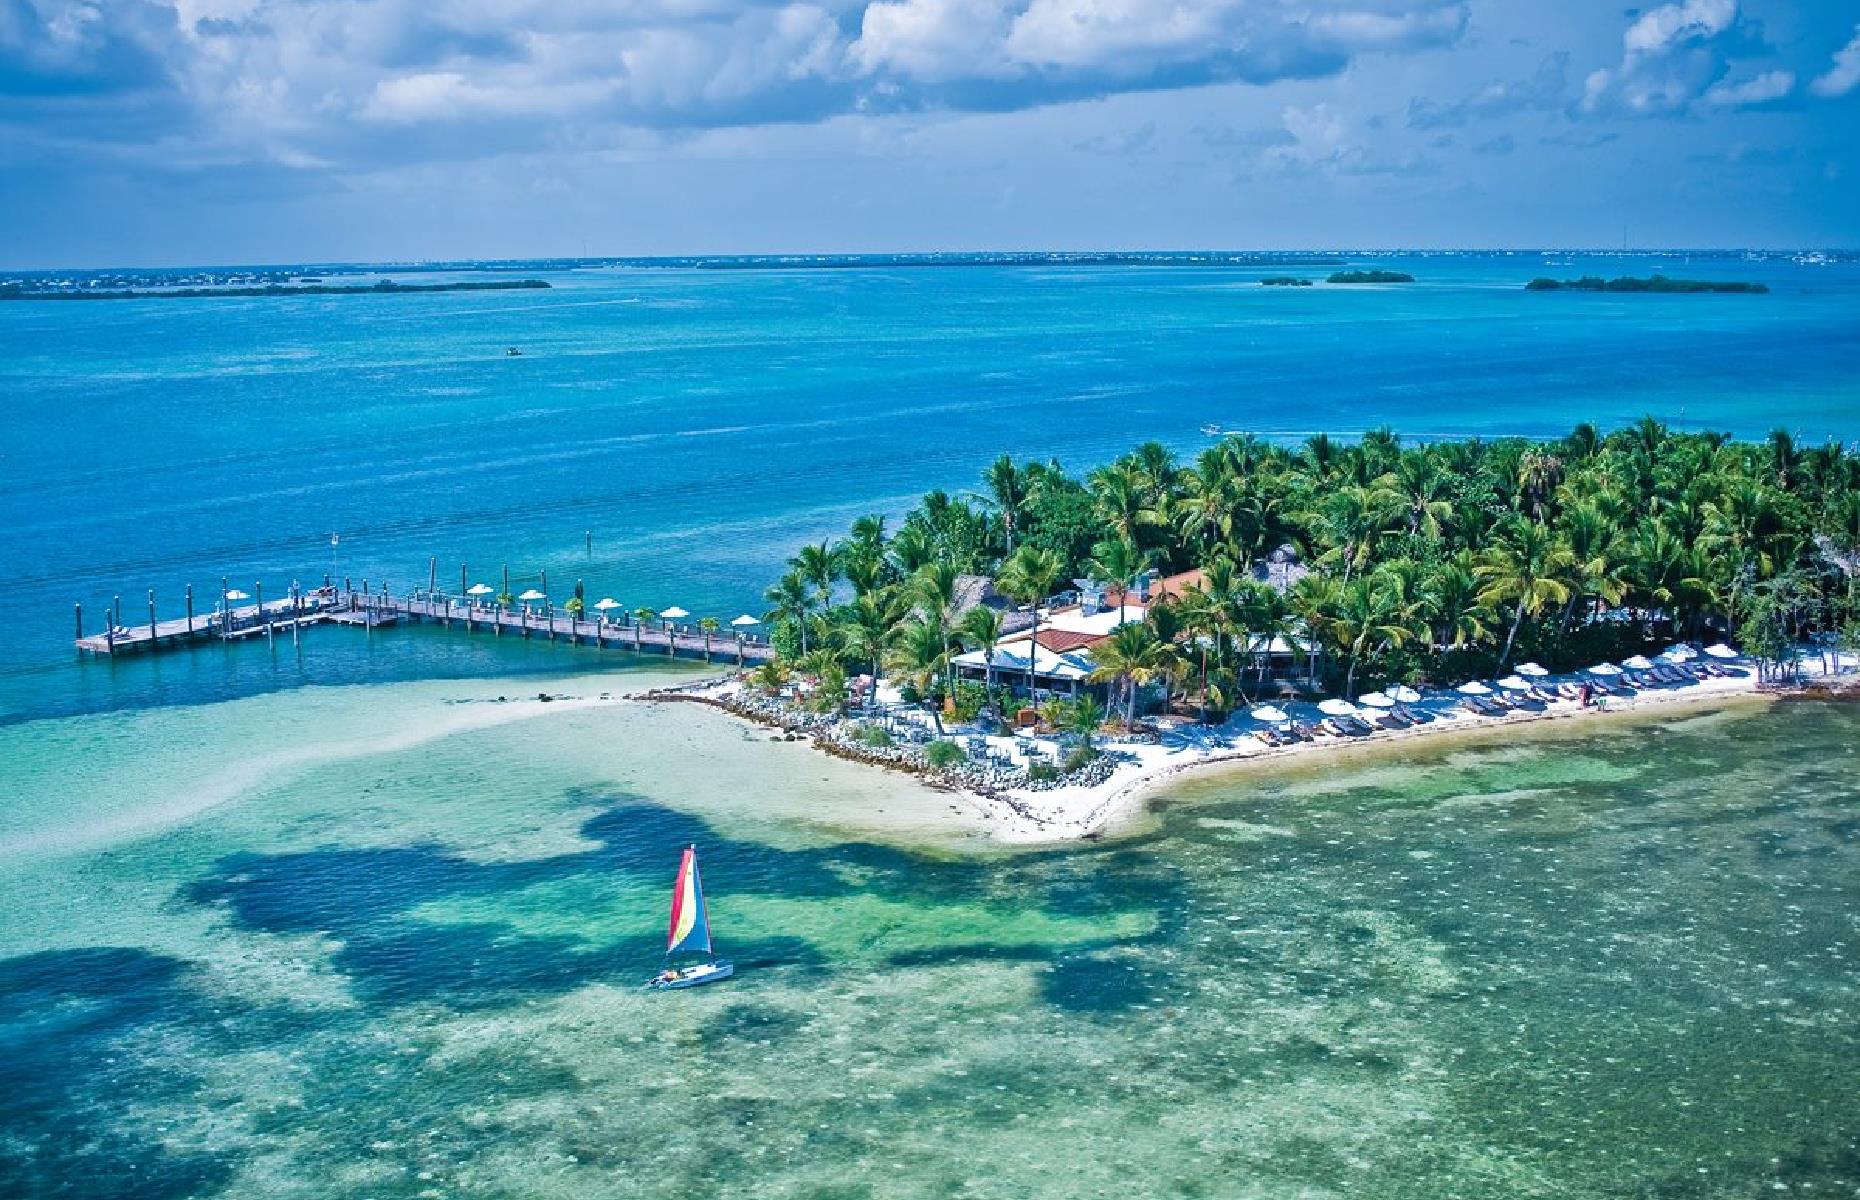 <p>The Florida Keys are as tropical as it gets on the continental US and this gorgeous private island spa and resort feels like it could be in the Caribbean. <a href="https://www.littlepalmisland.com">The resort</a> is accessible by sea plane or boat and guests are welcomed with a shoreside reception. Once on the island, visitors can spend their days lounging on white sand beaches under the palms, relaxing in bungalow suites, unwinding in the spa and just drinking in the surroundings.</p>  <p><strong><a href="https://www.loveexploring.com/galleries/85410/americas-best-hotels-ranked-2021">These are America's best hotels</a></strong></p>